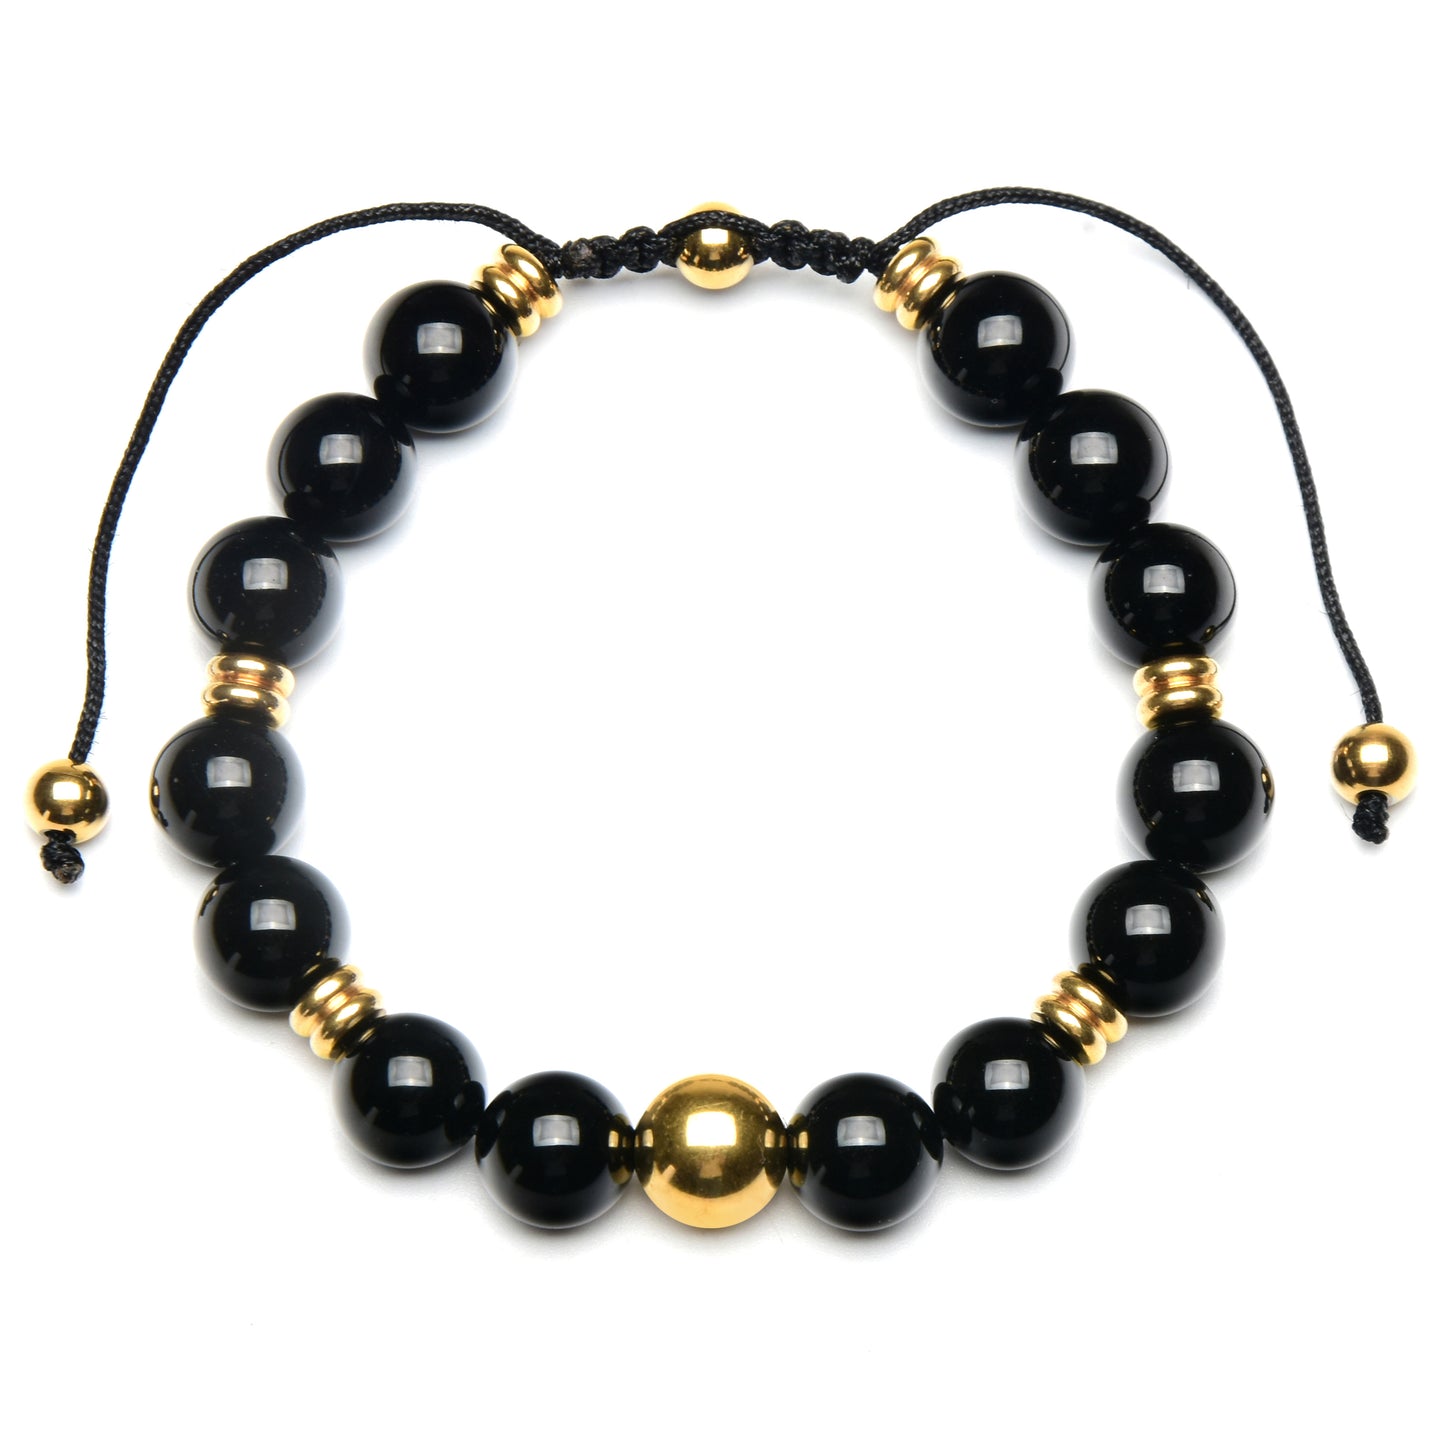 Men's Onyx Stone and Gold Plated Stainless Steel Bead Adjustable Bracelet (10mm)